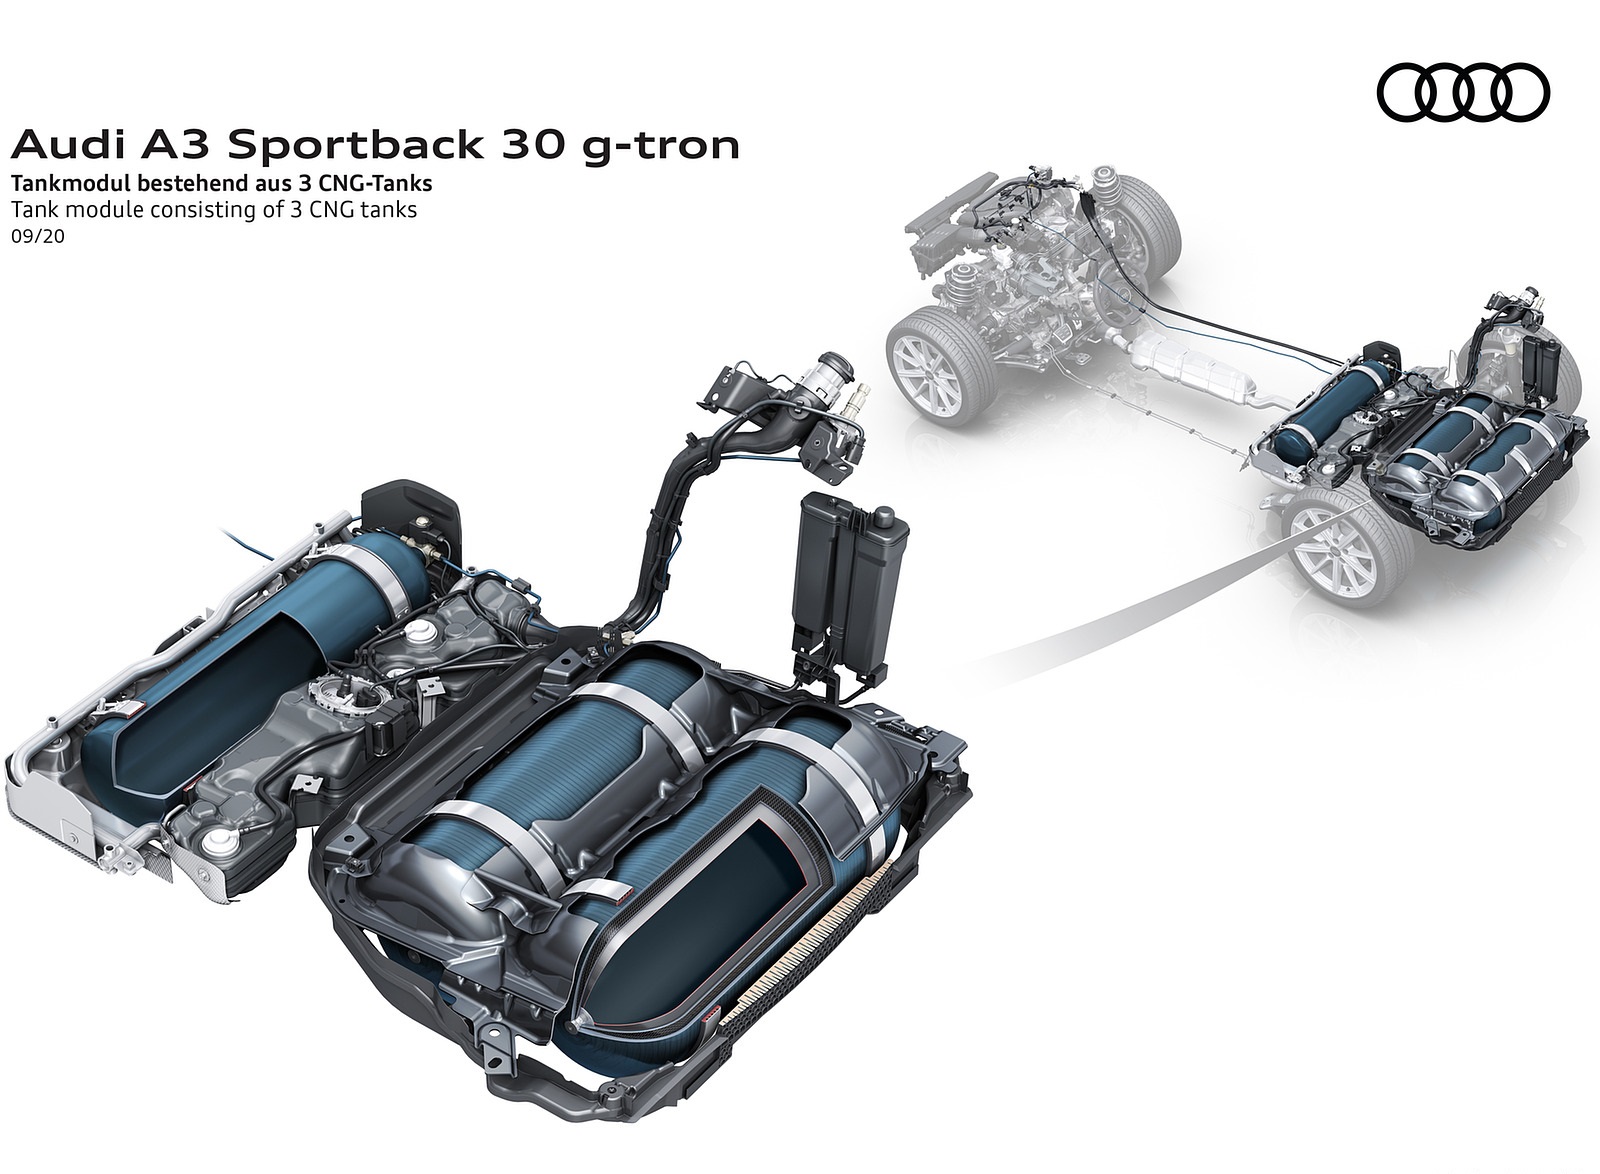 2021 Audi A3 Sportback 30 g-tron Tank modul consisting of 3 CNG tanks Wallpapers #17 of 27